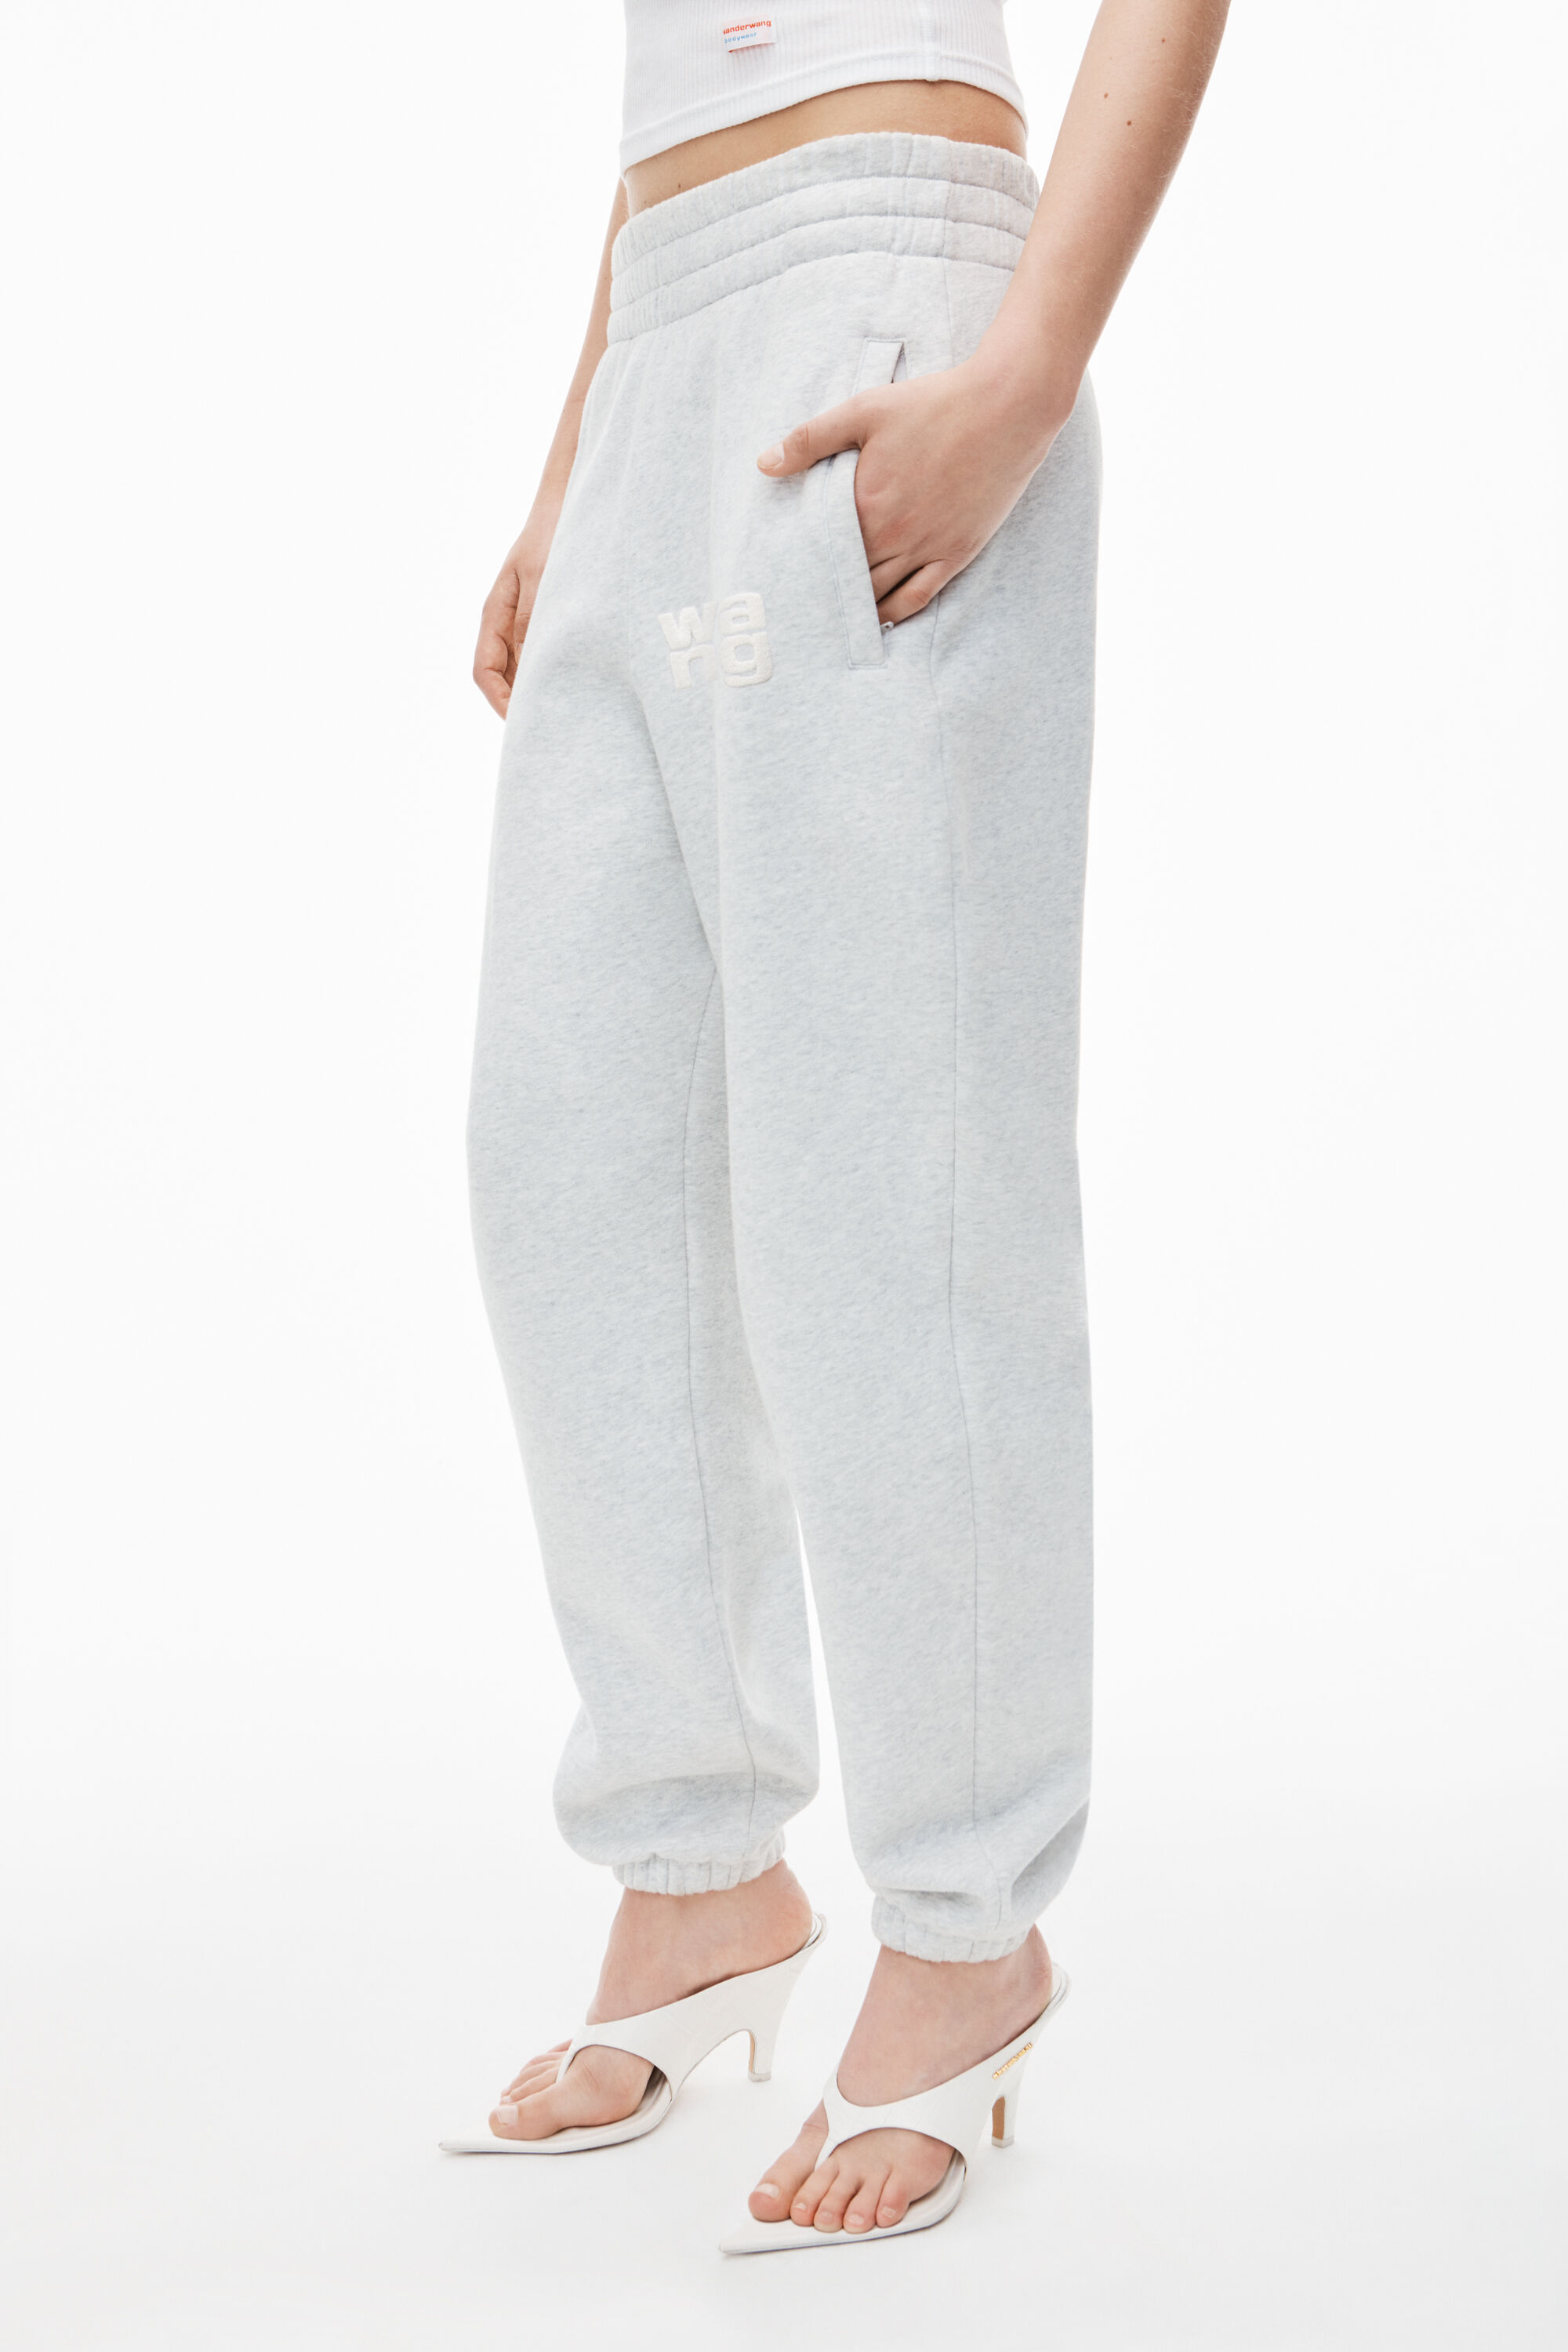 alexanderwang PUFF LOGO SWEATPANT IN STRUCTURED TERRY LIGHT 